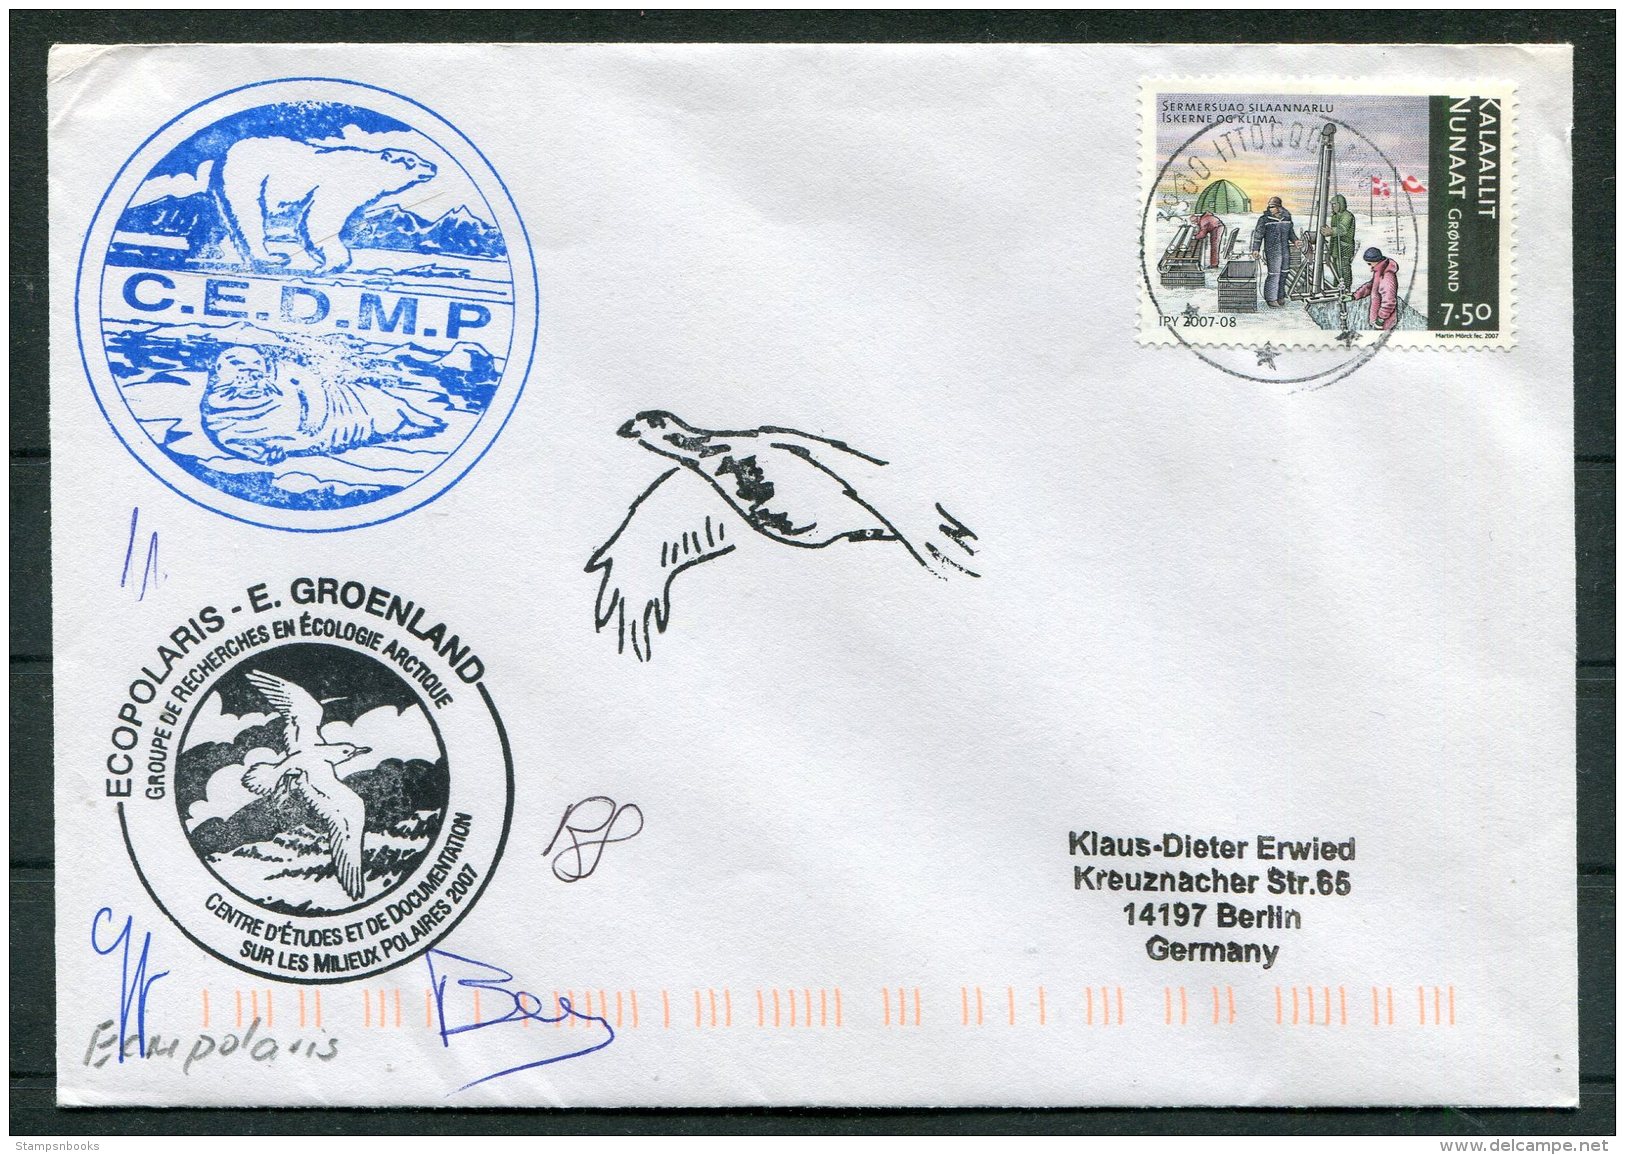 Greenland Ecopolaris C.E.D.M.P. Polar Bear, Walrus  Arctic Expedition Signed Cover - Covers & Documents